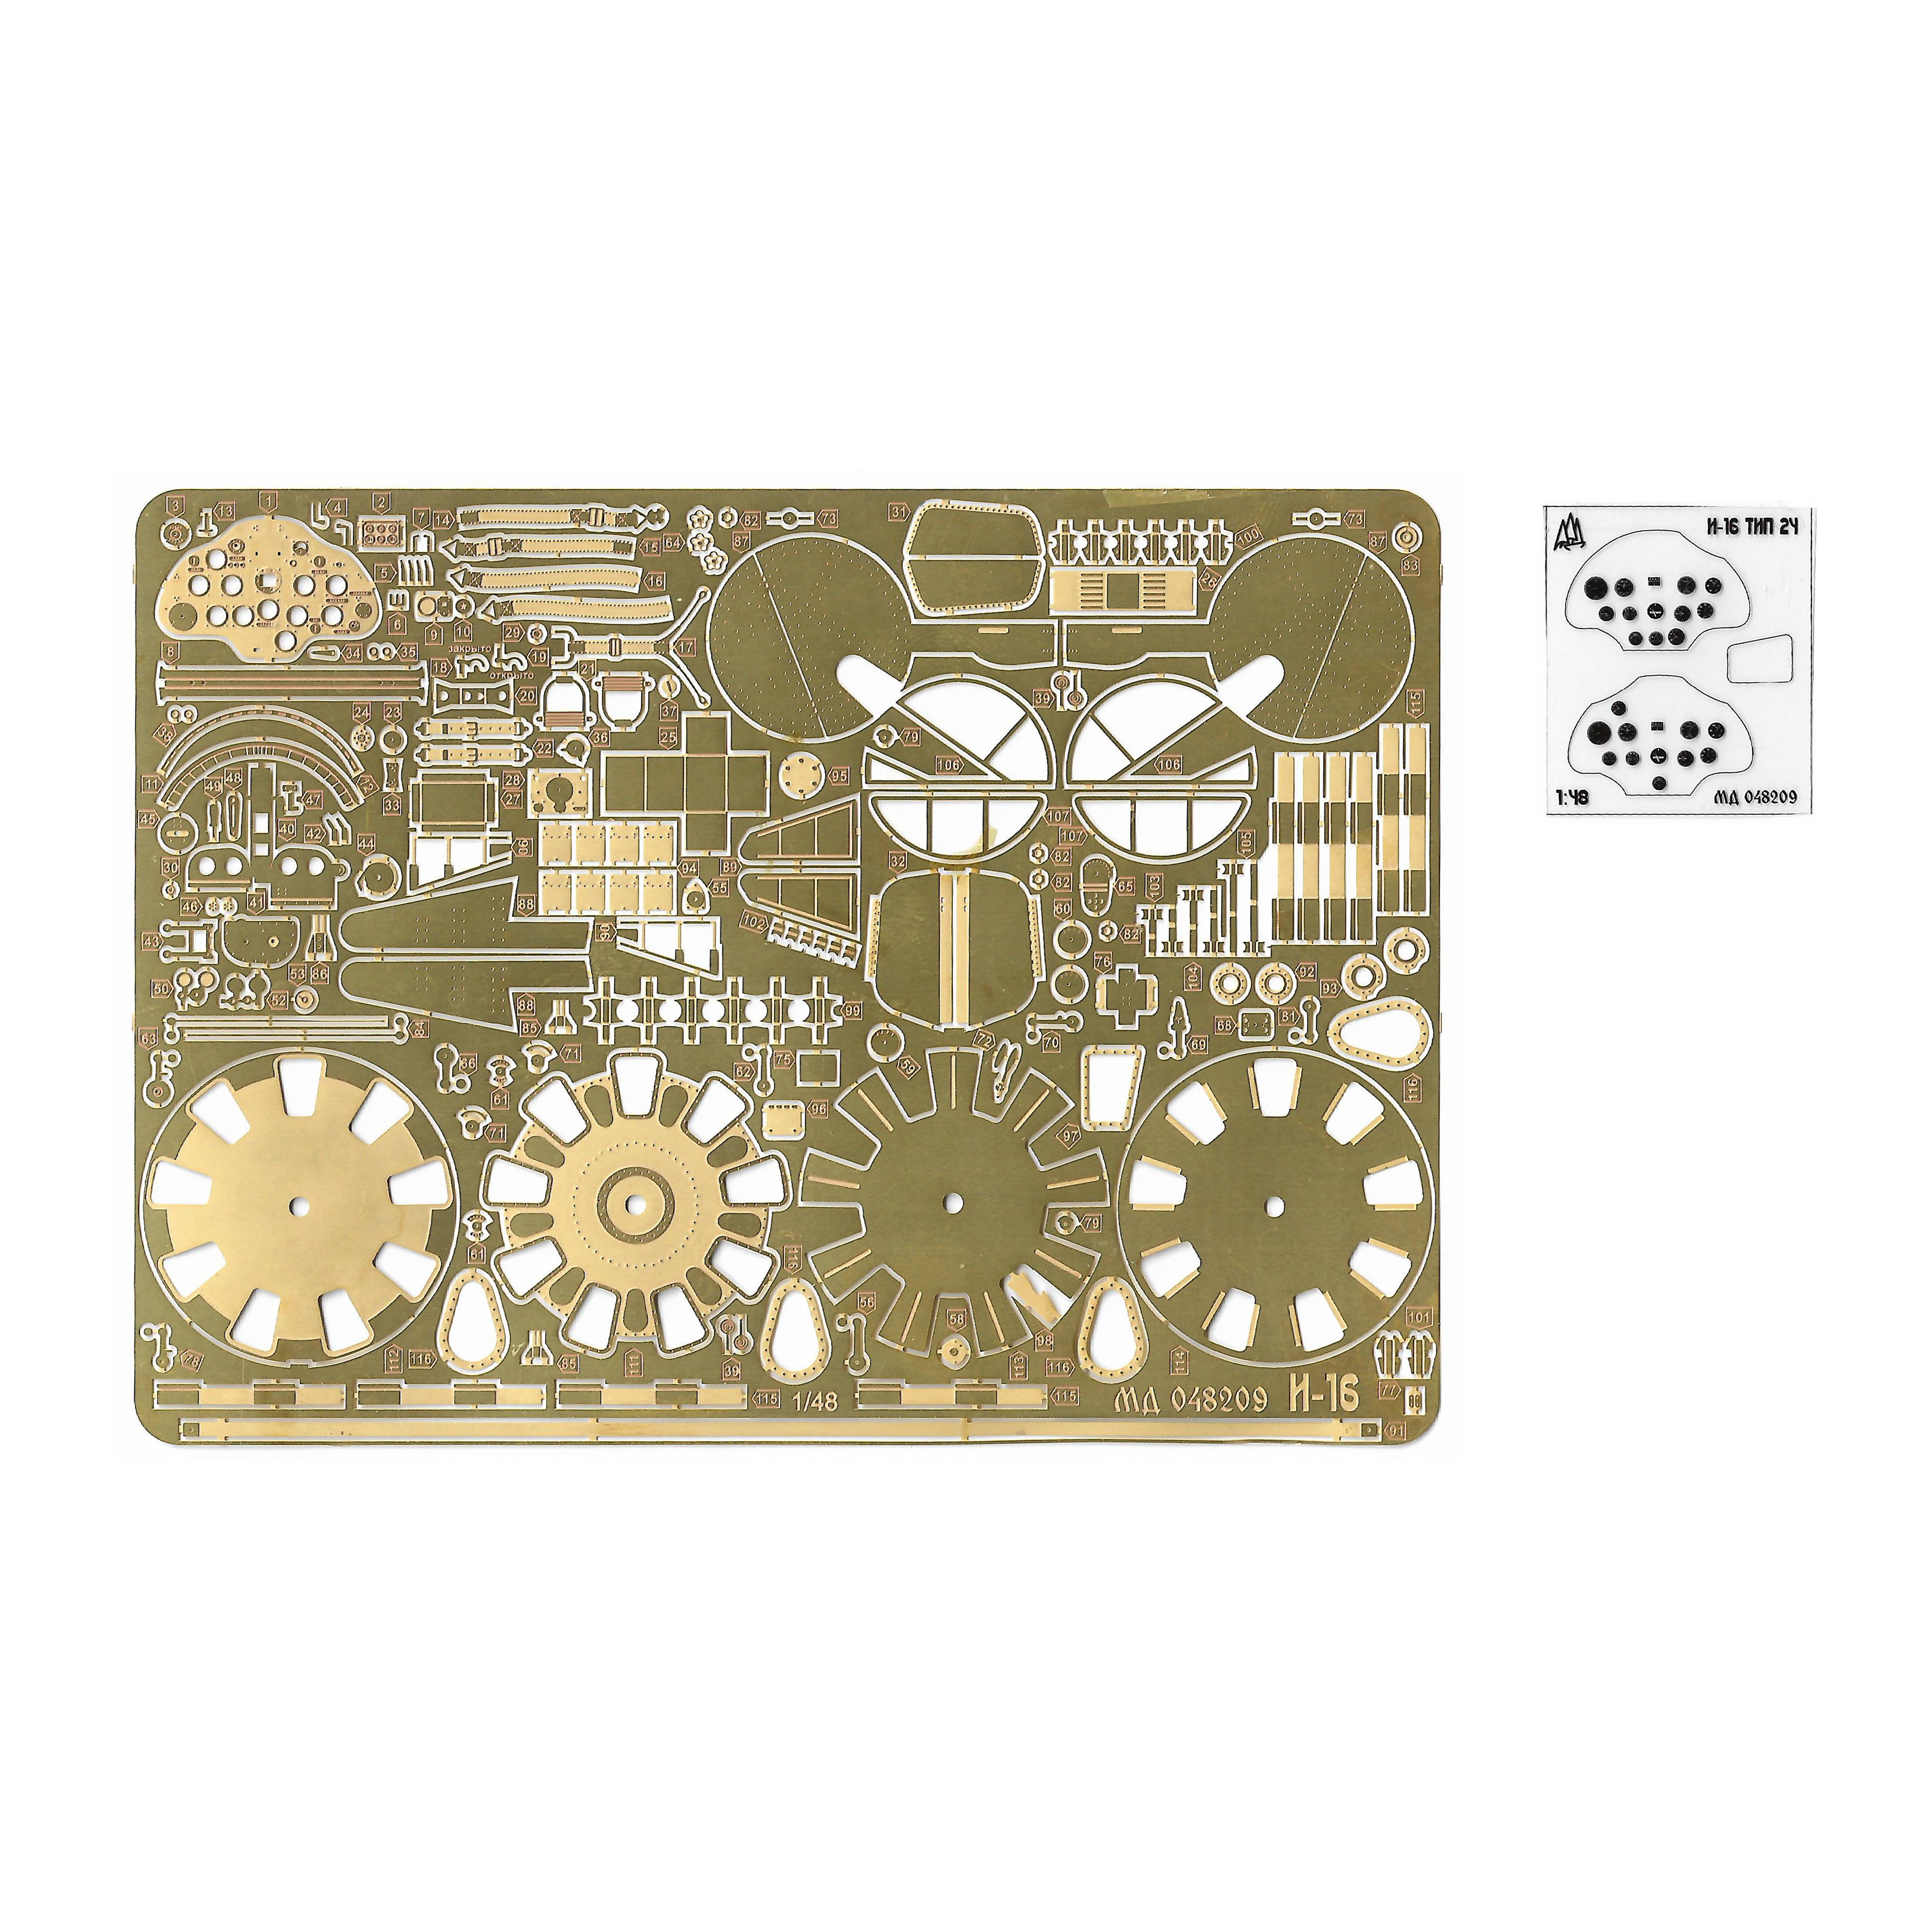 048209 Microdesign 1/48 photo Etching for I-16 from ICM